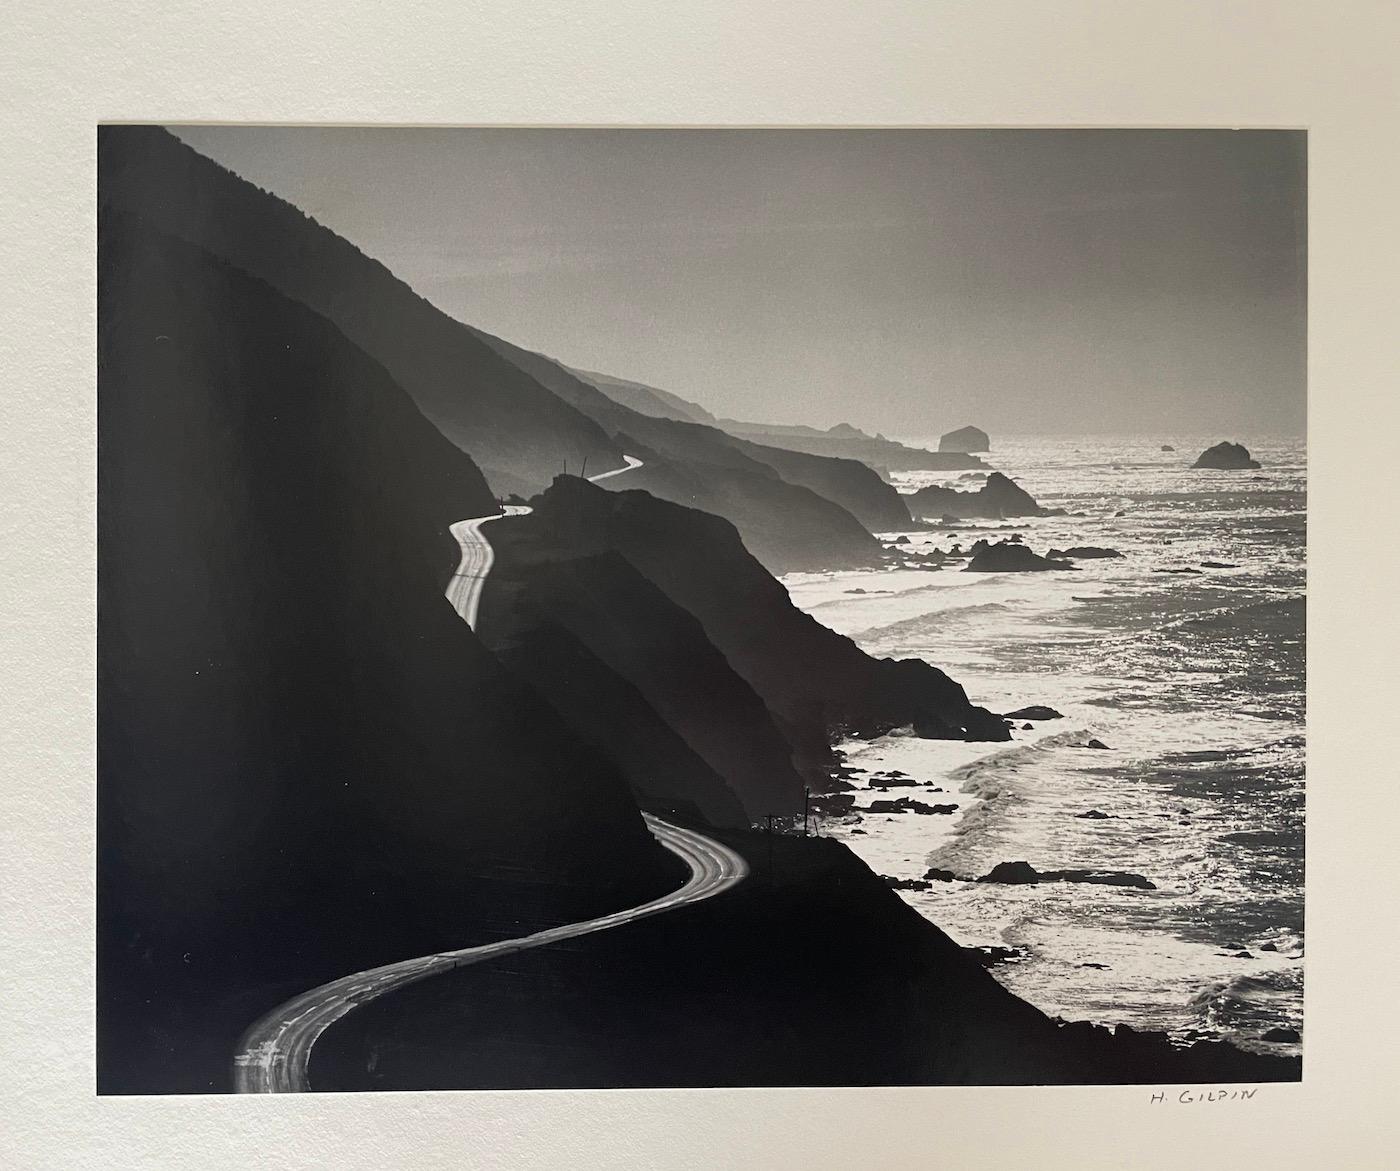 Highway One, Big Sur California - Photograph by Henry Gilpin